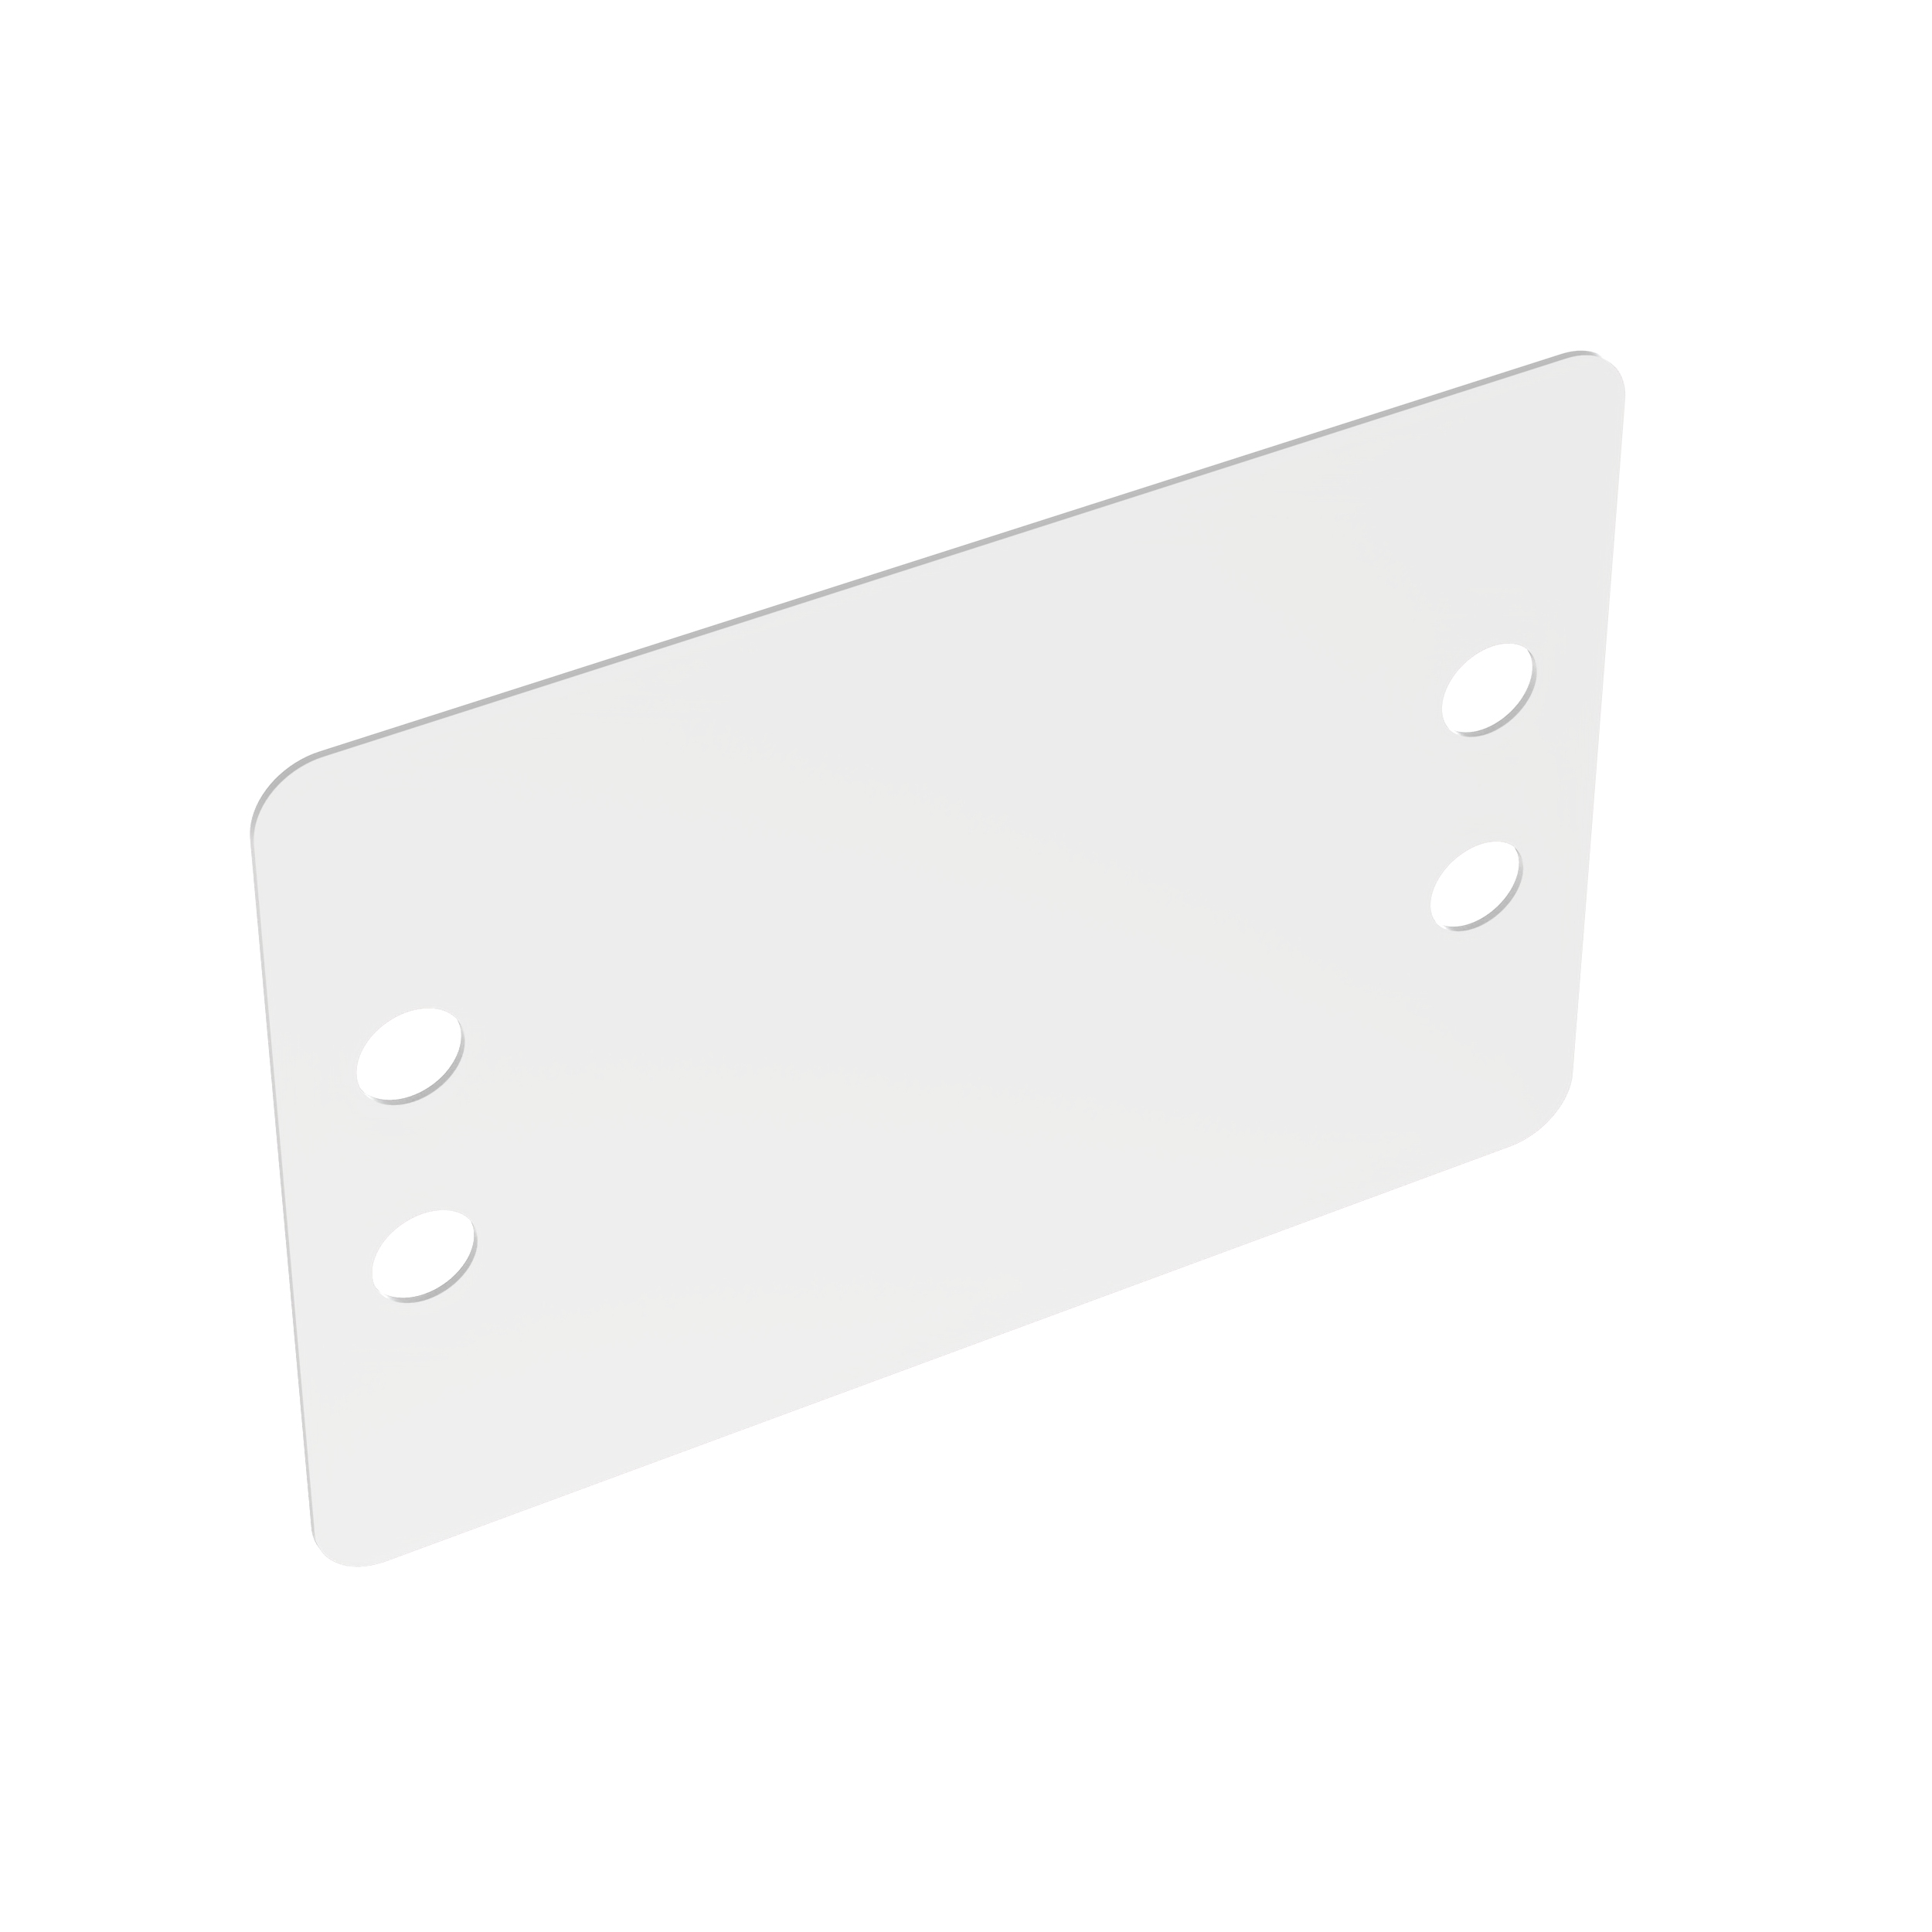 MP250W175-C Marker Plate, White, PA 6.6, Cable Tie, 2.5x1.75", PK100